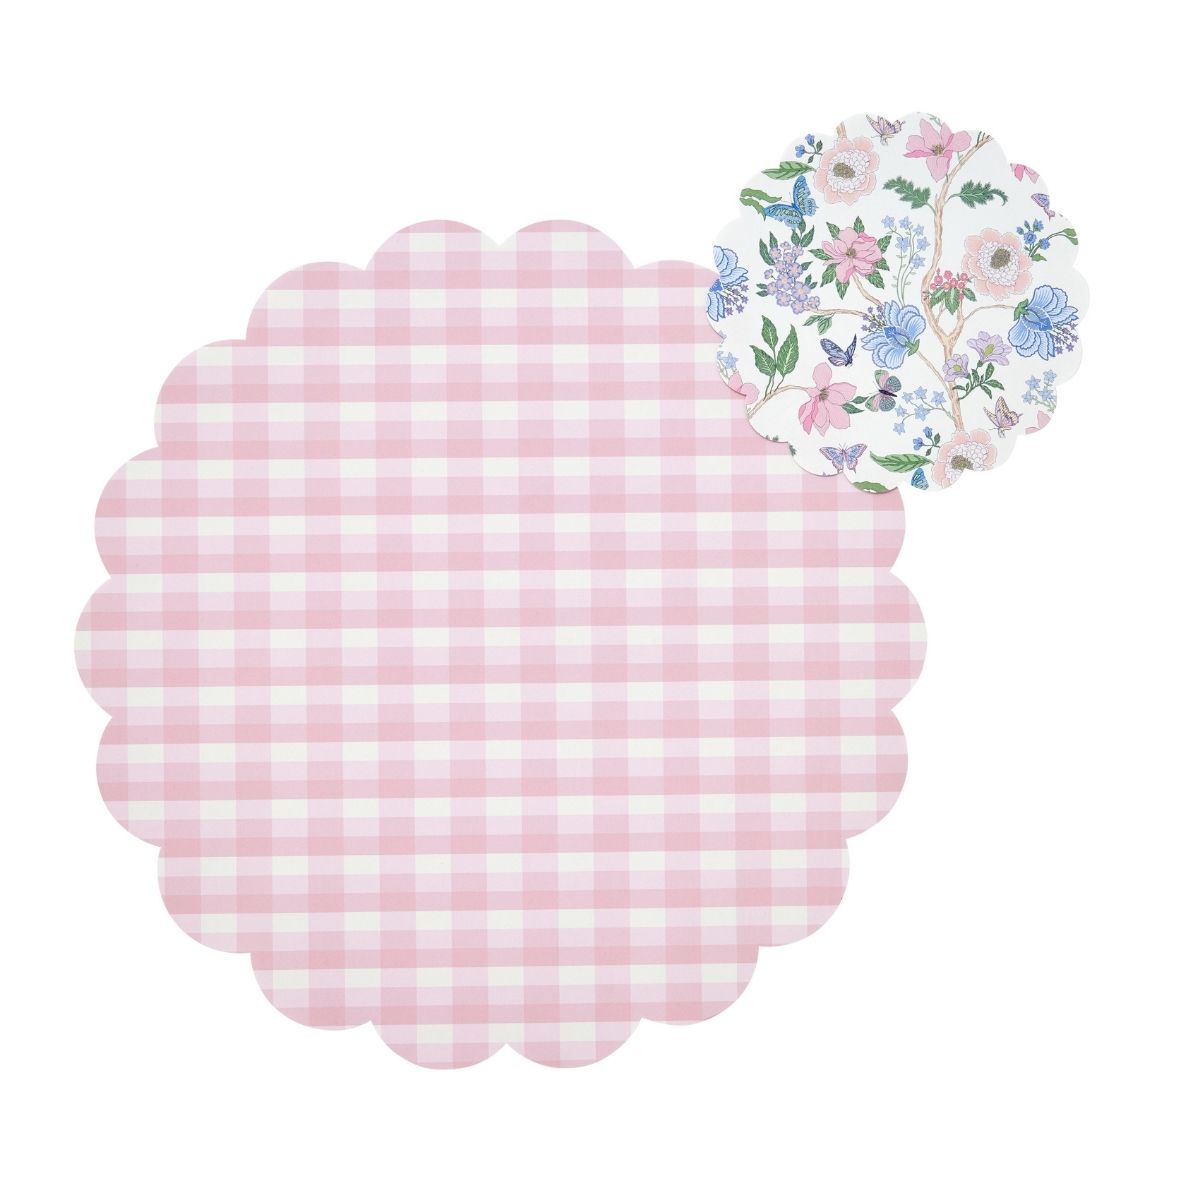 Vichy Check in Pink Doily Sets